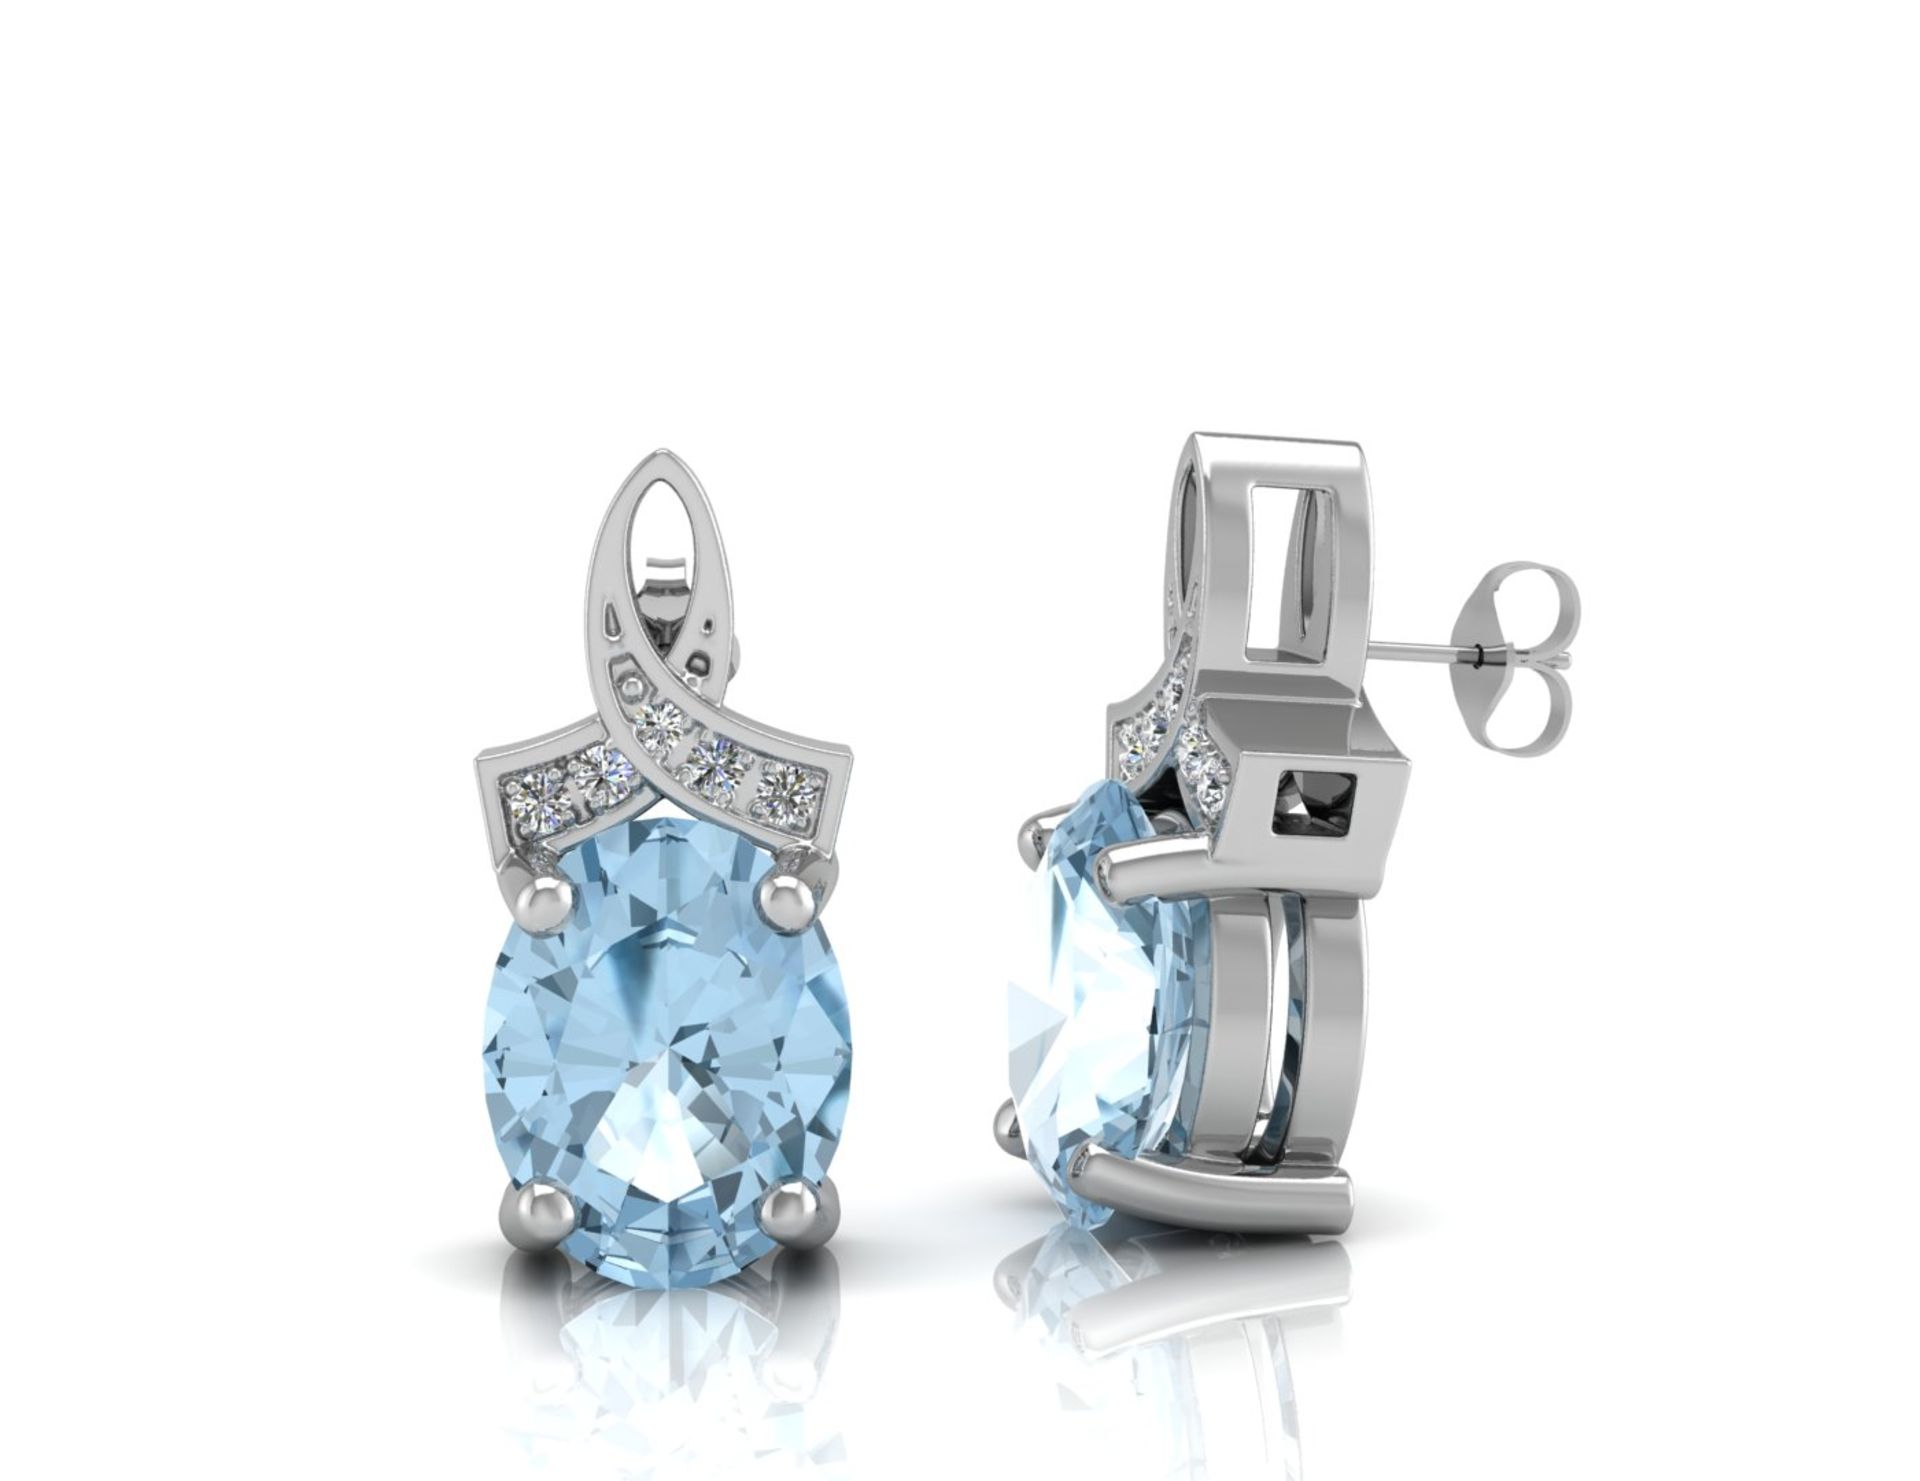 9ct White Gold Diamond And Blue Topaz Earring 0.03 Carats - Valued by GIE £1,140.00 - 9ct White Gold